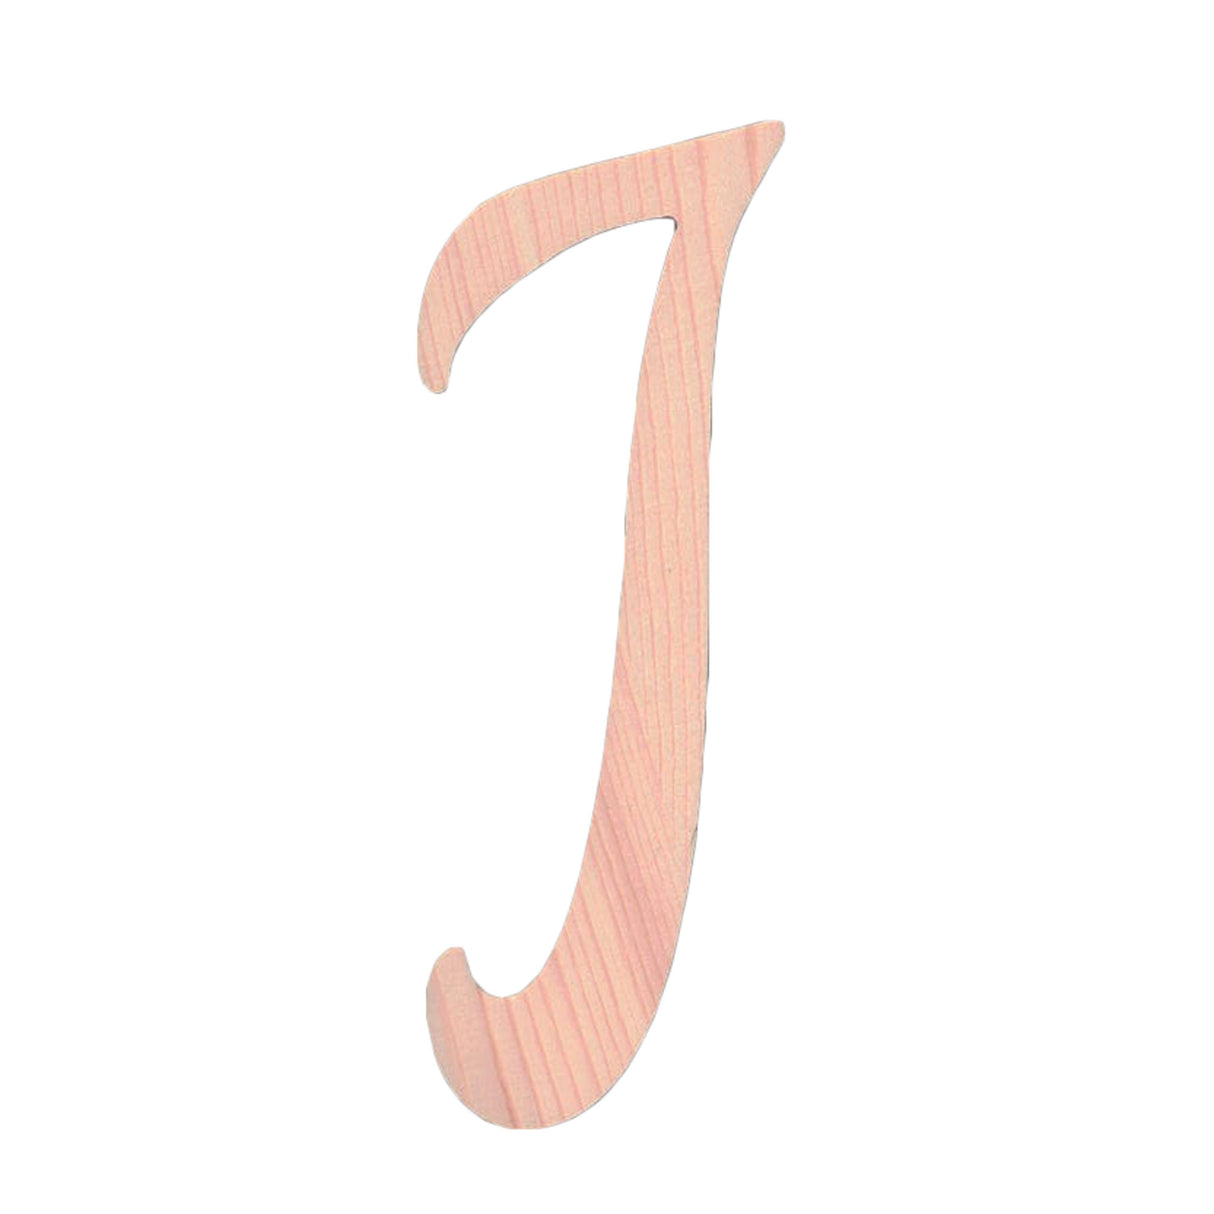 Unfinished Wooden Playball Italic Letter J (6.25 Inches) in Beige color,  shape